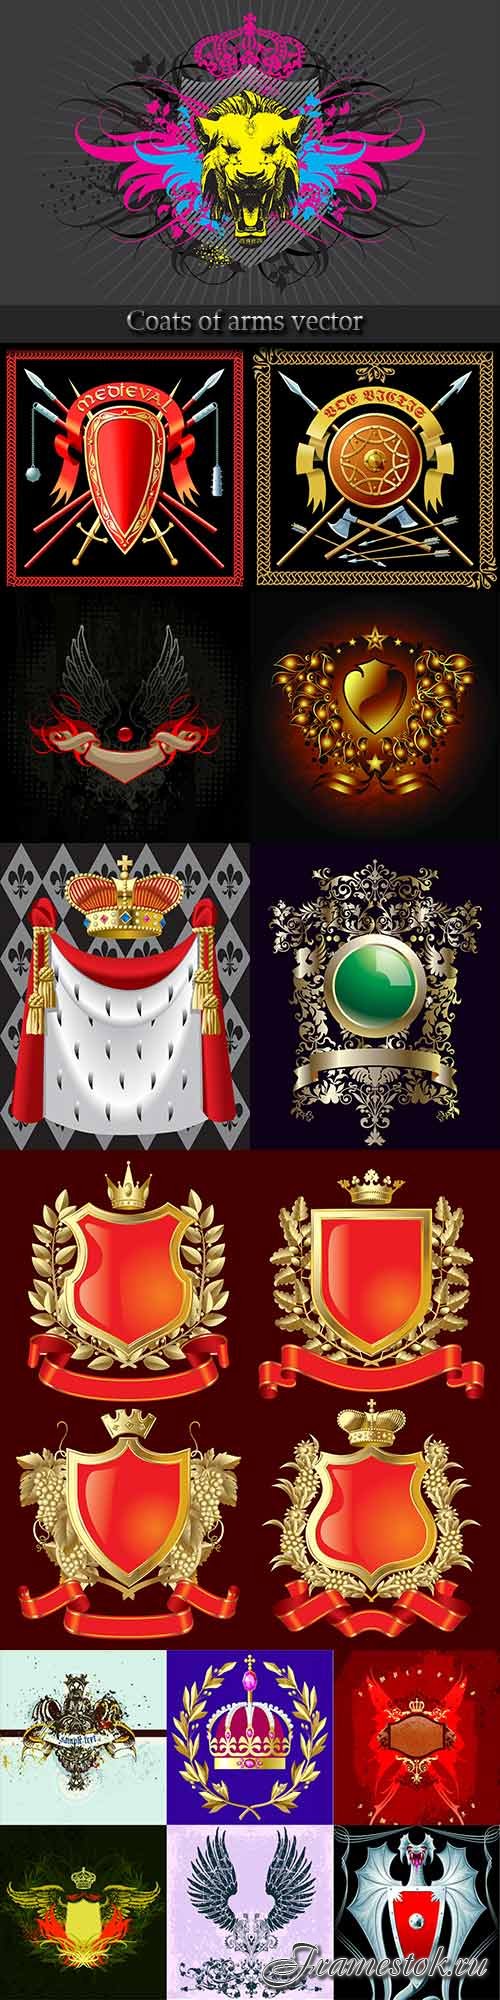 Coats of arms vector